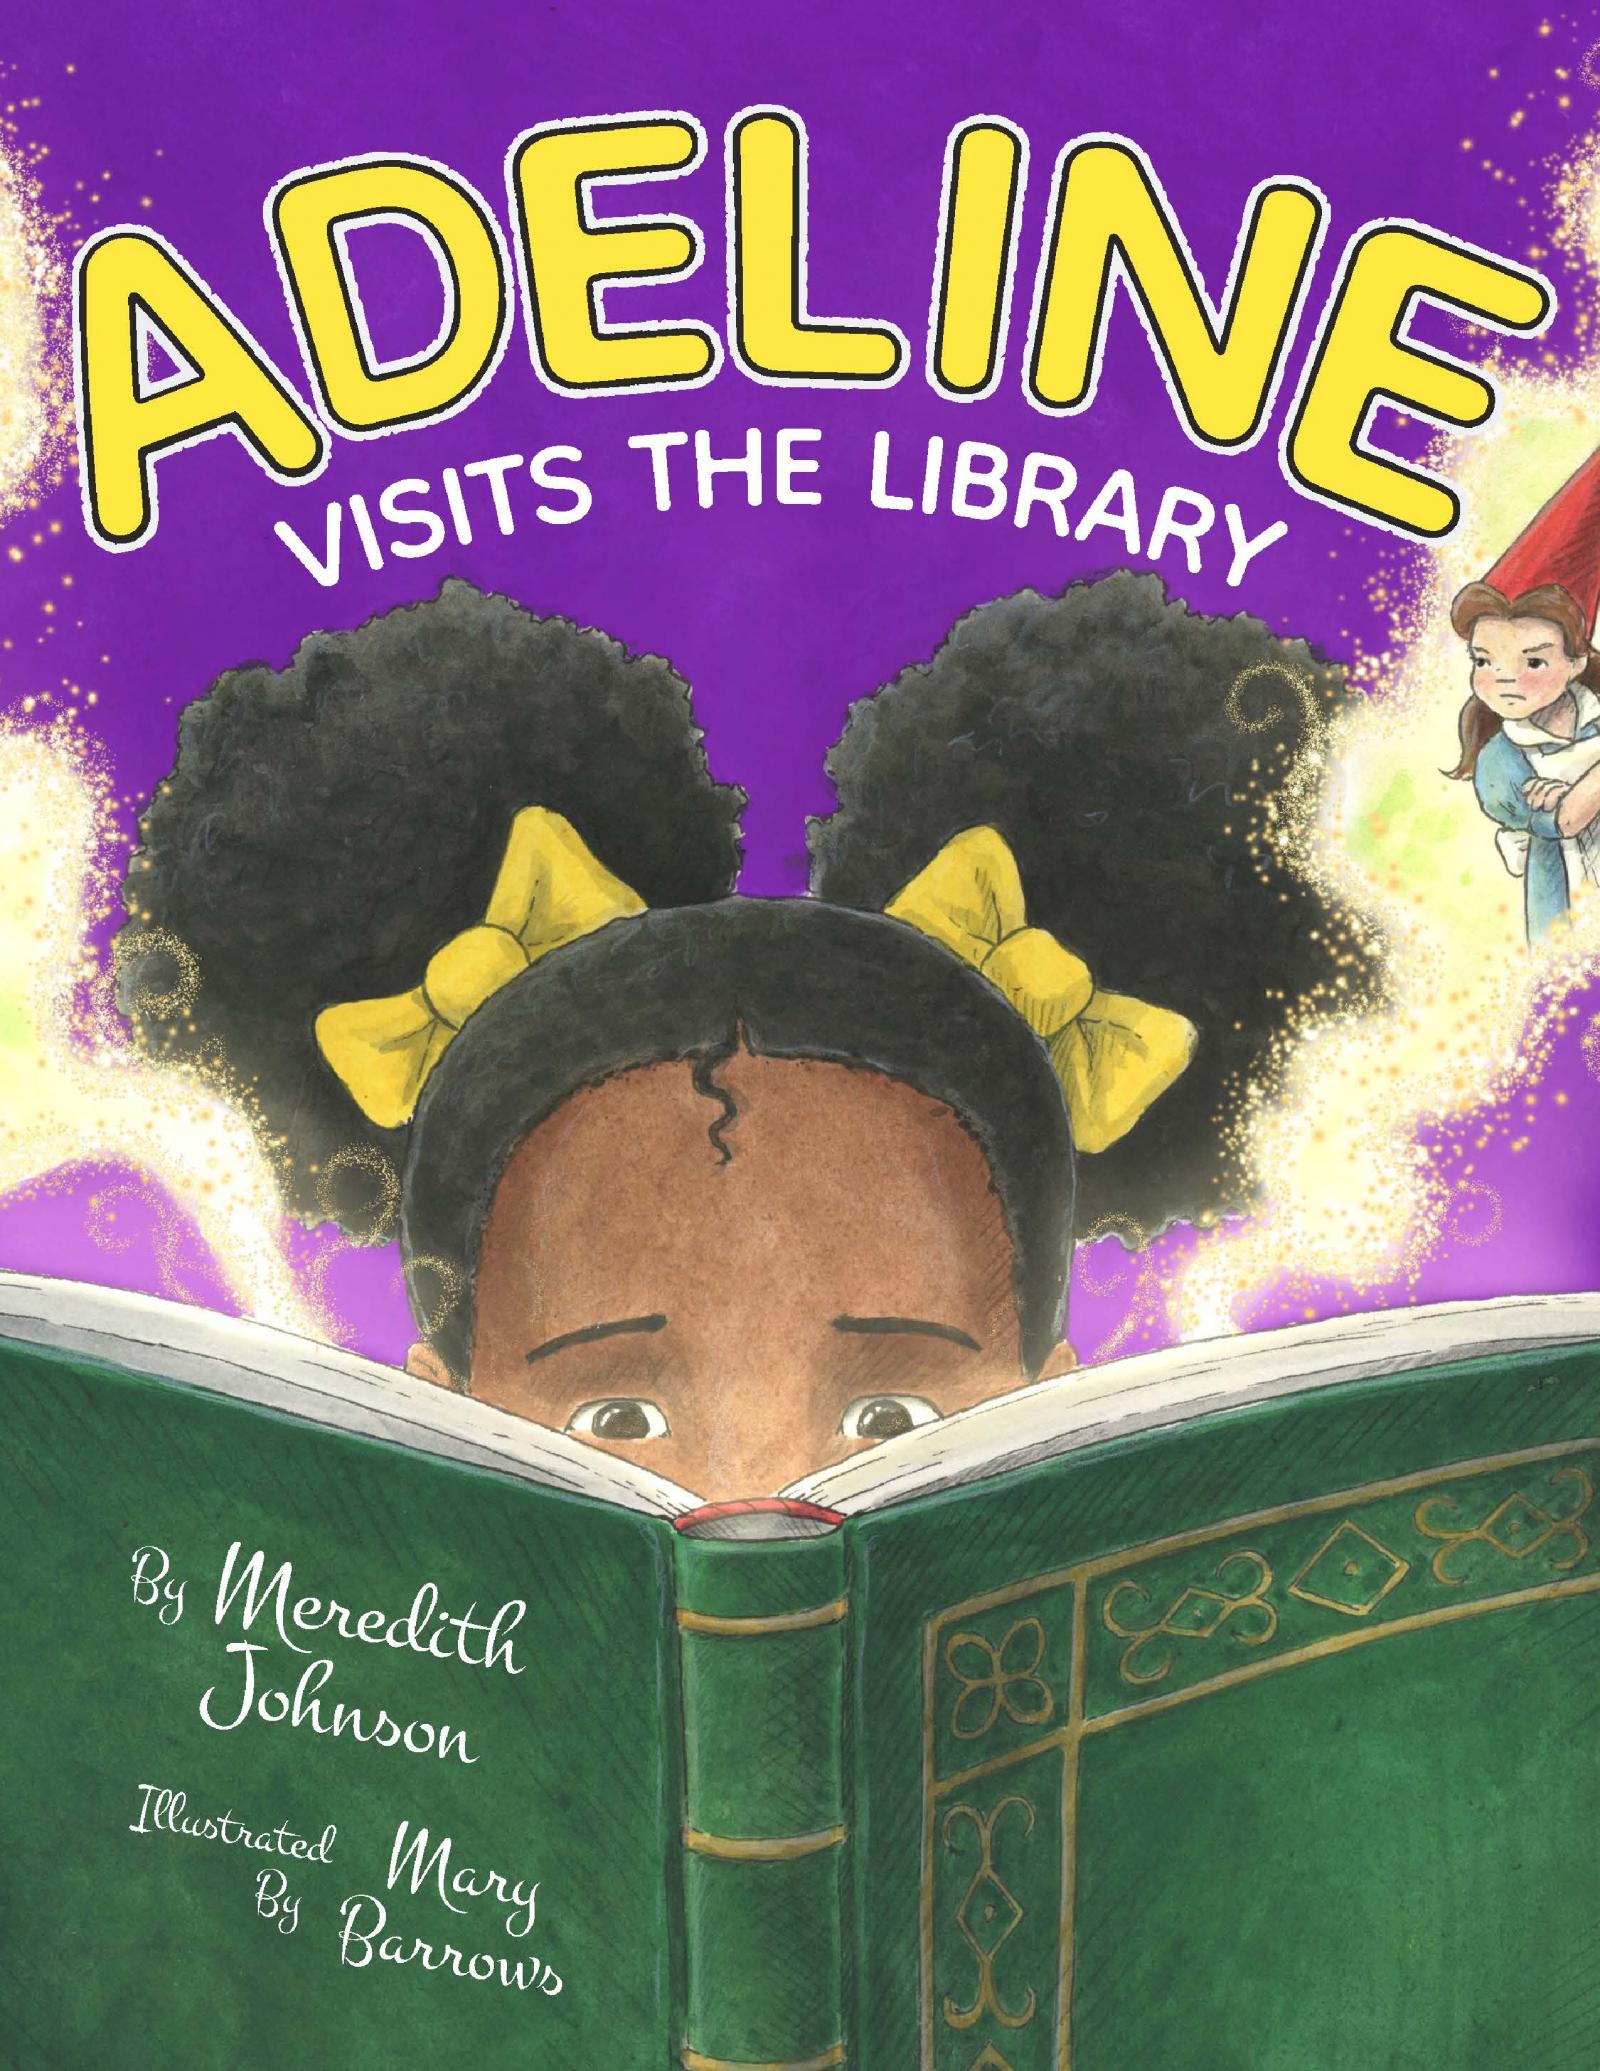 Meet Adeline, a spunky, daring, and always caring little girl who knows the library is the key to exploring worlds she's always wanted to see.

Her love of books is contagious, the librarians know her by name, and when she sits with her huge pile of books to read, she knows her day will never be the same. 

But when  boy from school comes into the library with a sad look and says he won't read a book, Adleine wants to know why and really wants to help him try. Through her love of stories, and a touch of imagination, Adeline will help him to see how wonderful books can truly be. 

In this kindhearted, rhyming story, Adeline helps young readers understand that a bit of imagination and kindness can be every kid's superpower. 